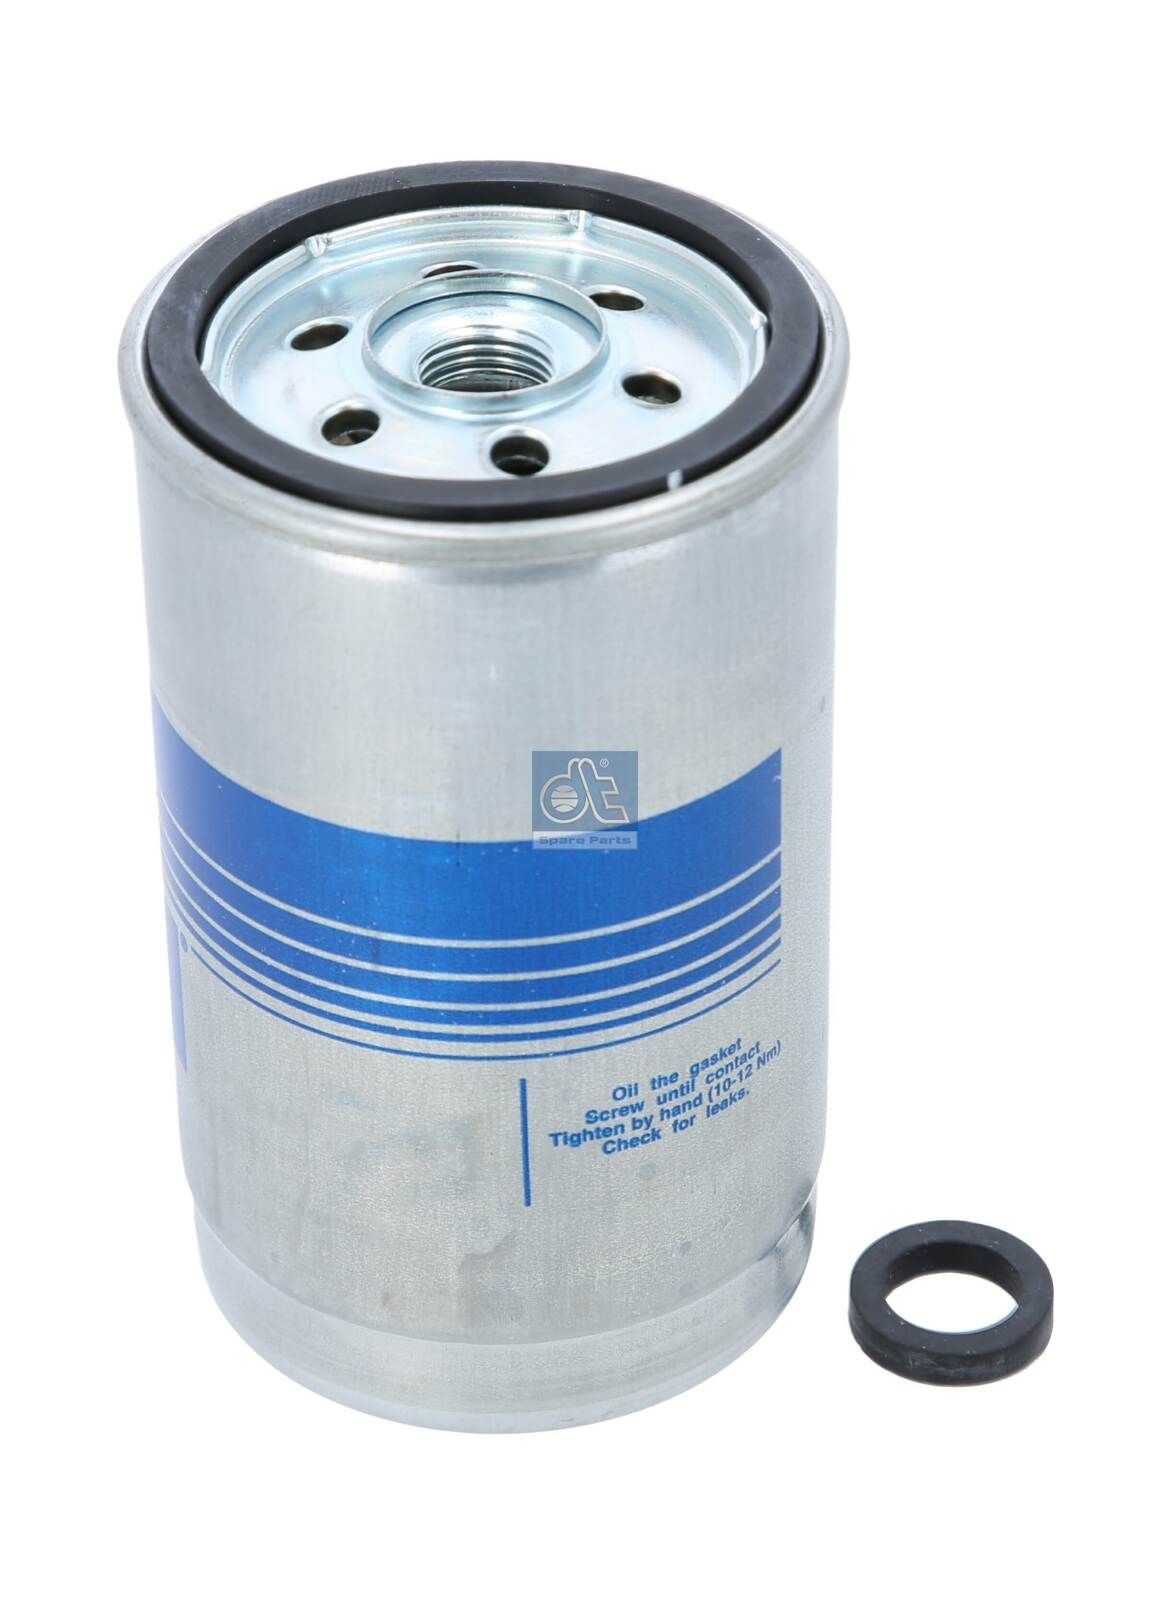 WDK 725 DT Spare Parts 3.22003 Fuel filter 51 12503 0028